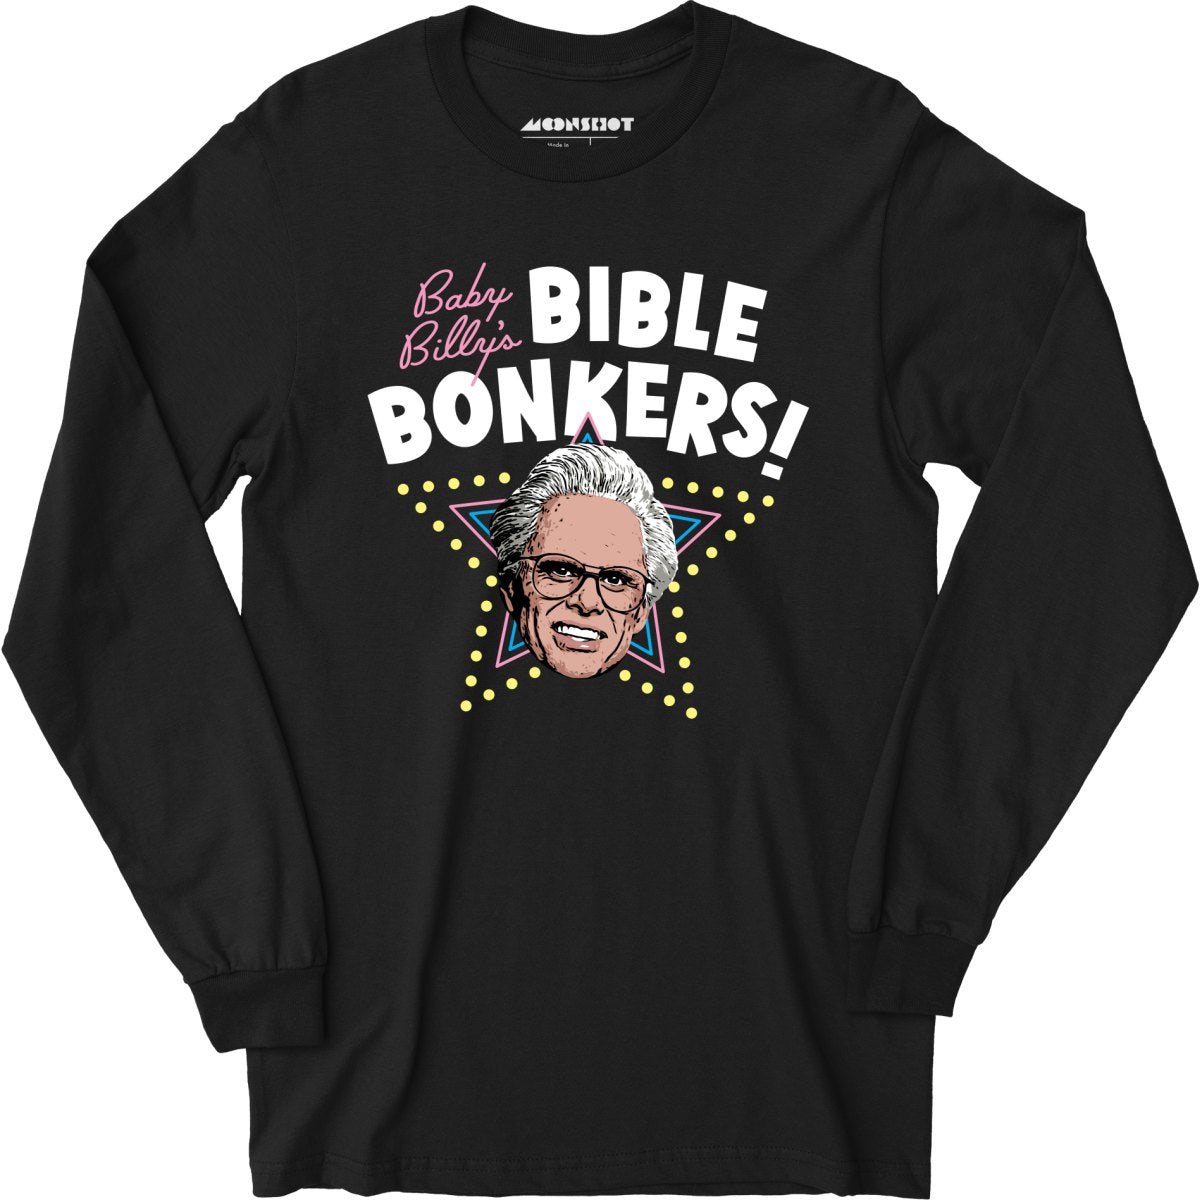 Baby Billy's Bible Bonkers - Long Sleeve T-Shirt